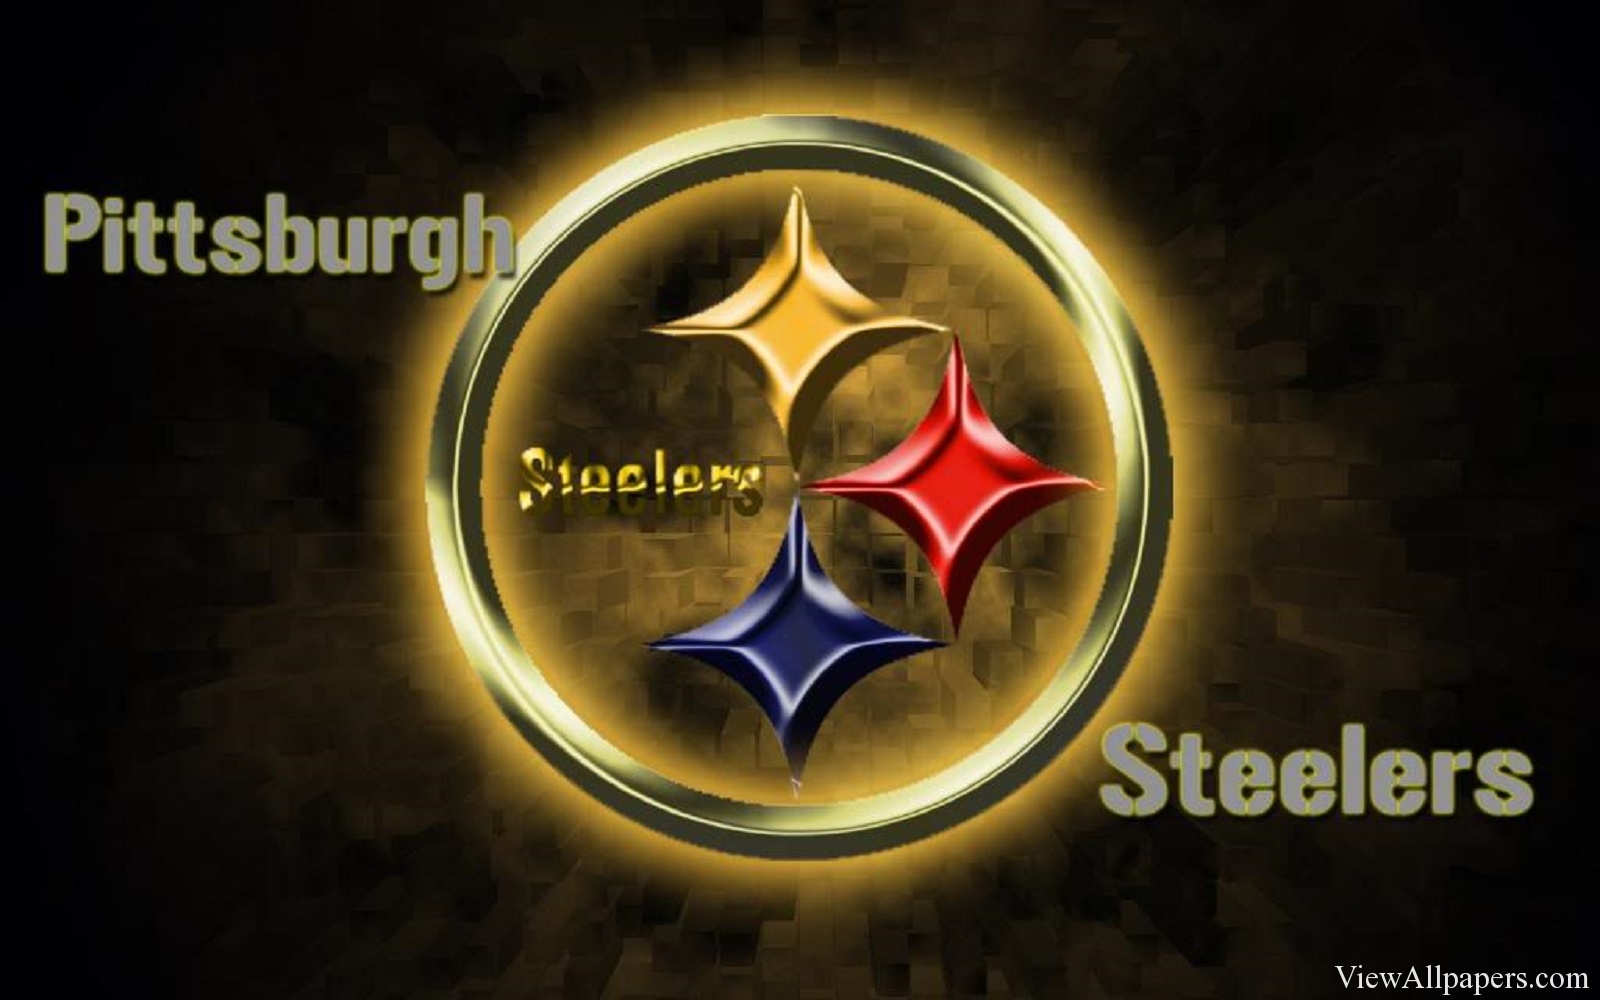 HD Resolution Wallpaper download Pittsburgh Steelers Logo For PC 1600x1000